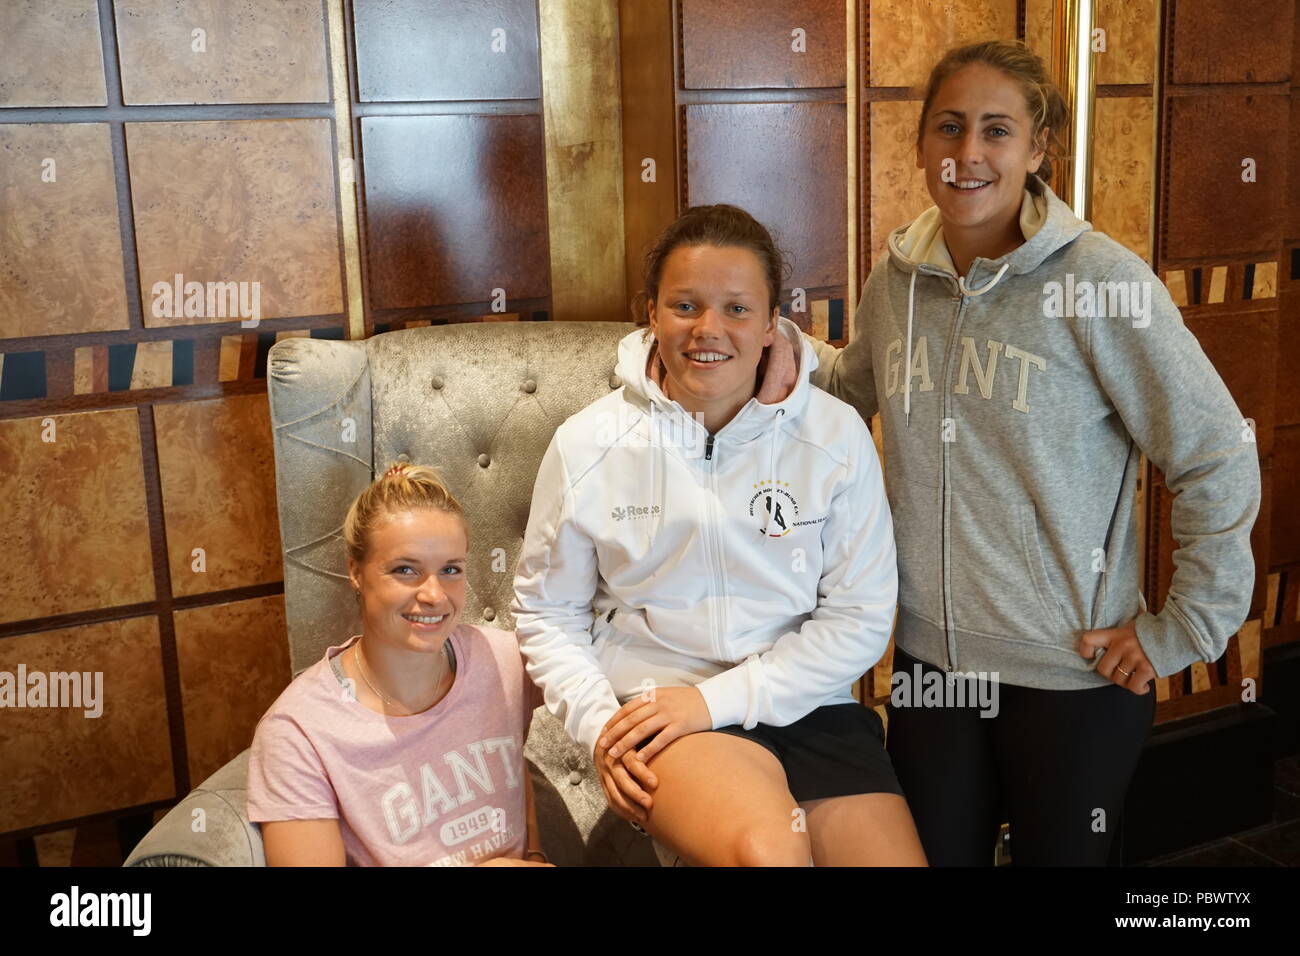 30.07.2018, Great Britain, London: Hockey, World Cup, Field, Ladies. The hockey players (l-r) goalkeeper Julia Ciupka, Charlotte Stapenhorst, Marie Maevers from Germany sit in the London team hotel Grange City. The German women's hockey team will once again face Spain in the quarter-finals of the World Cup in London. The Olympic bronze medallist Germany had previously secured first place in preliminary round group C with three wins and was thus directly qualified for the round of the best eight. Photo: Nina Niedermeyer/dpa Stock Photo